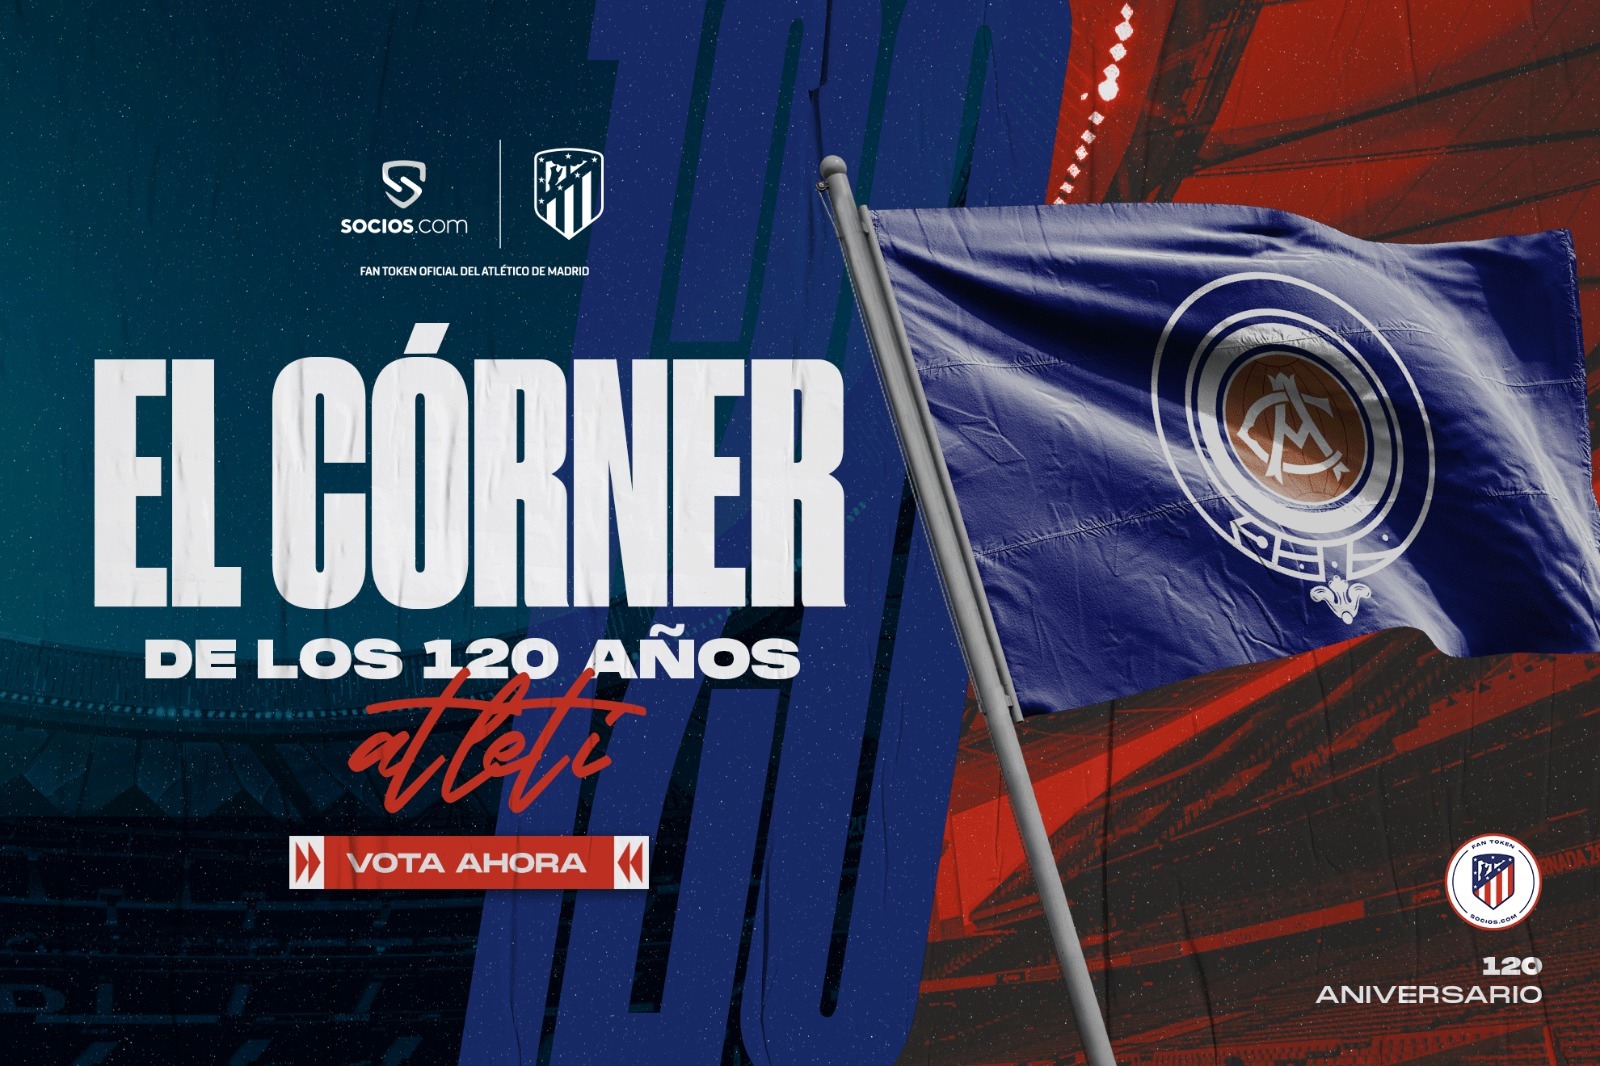 Atletico Madrid Fan Token holders will choose the corner flag for the club's 120th anniversary